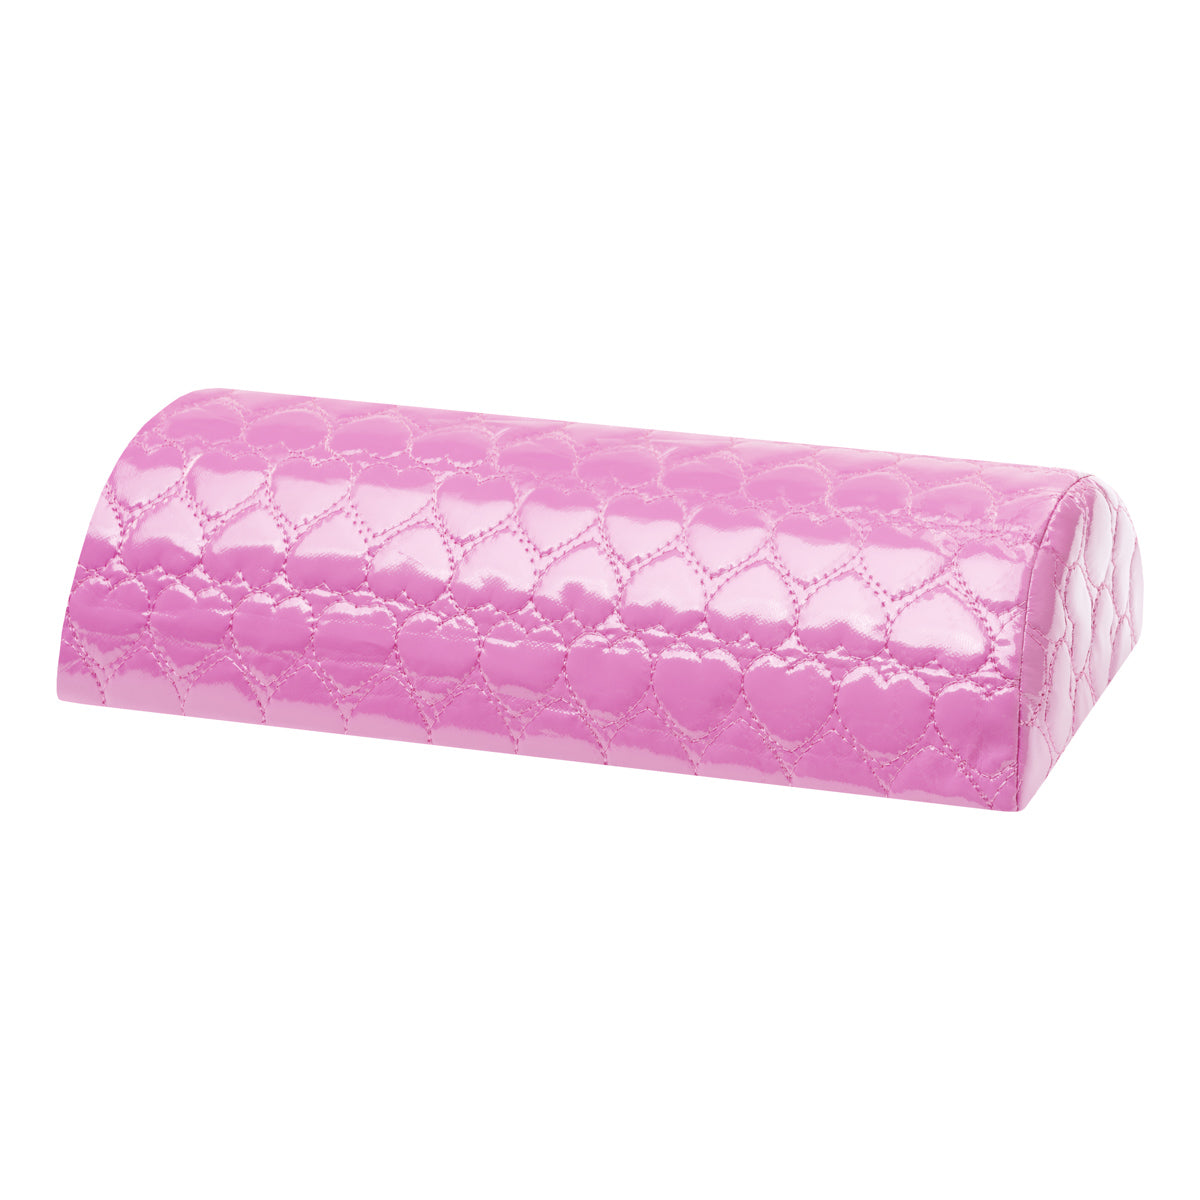 Manicure pillow pink